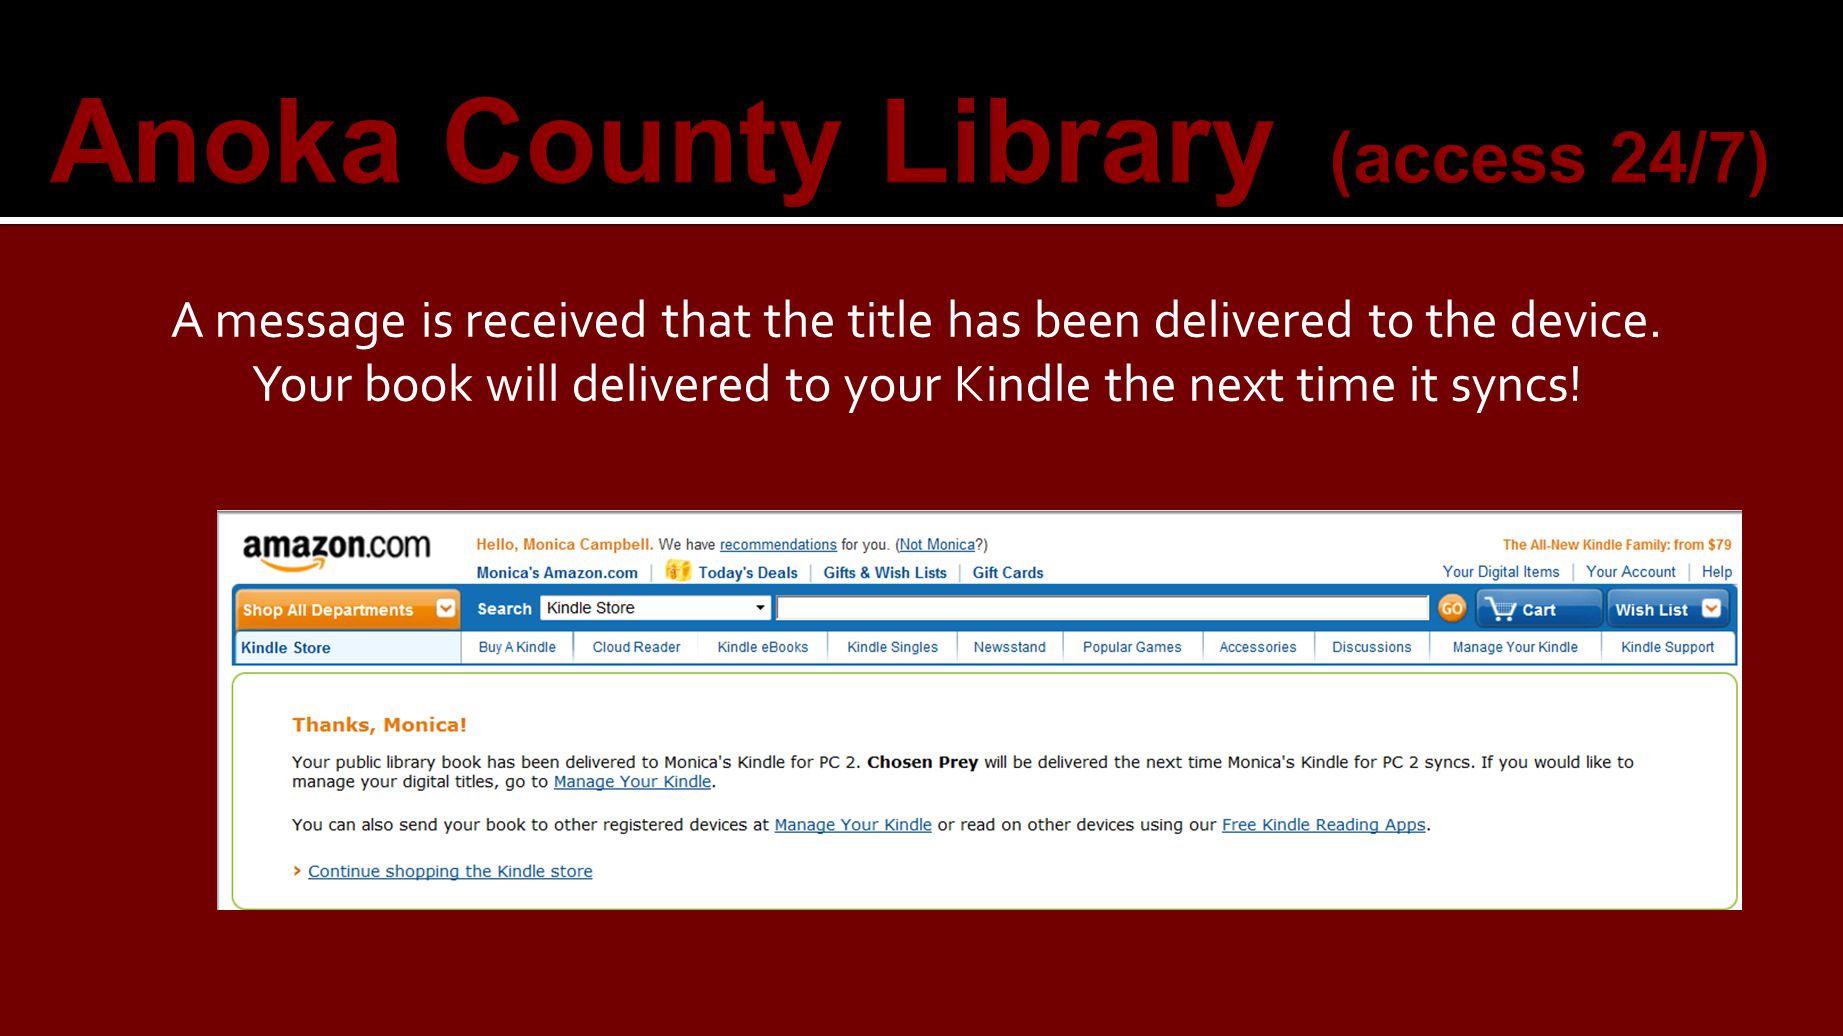 Anoka County Library (access 24/7) A message is received that the title has been delivered to the device.